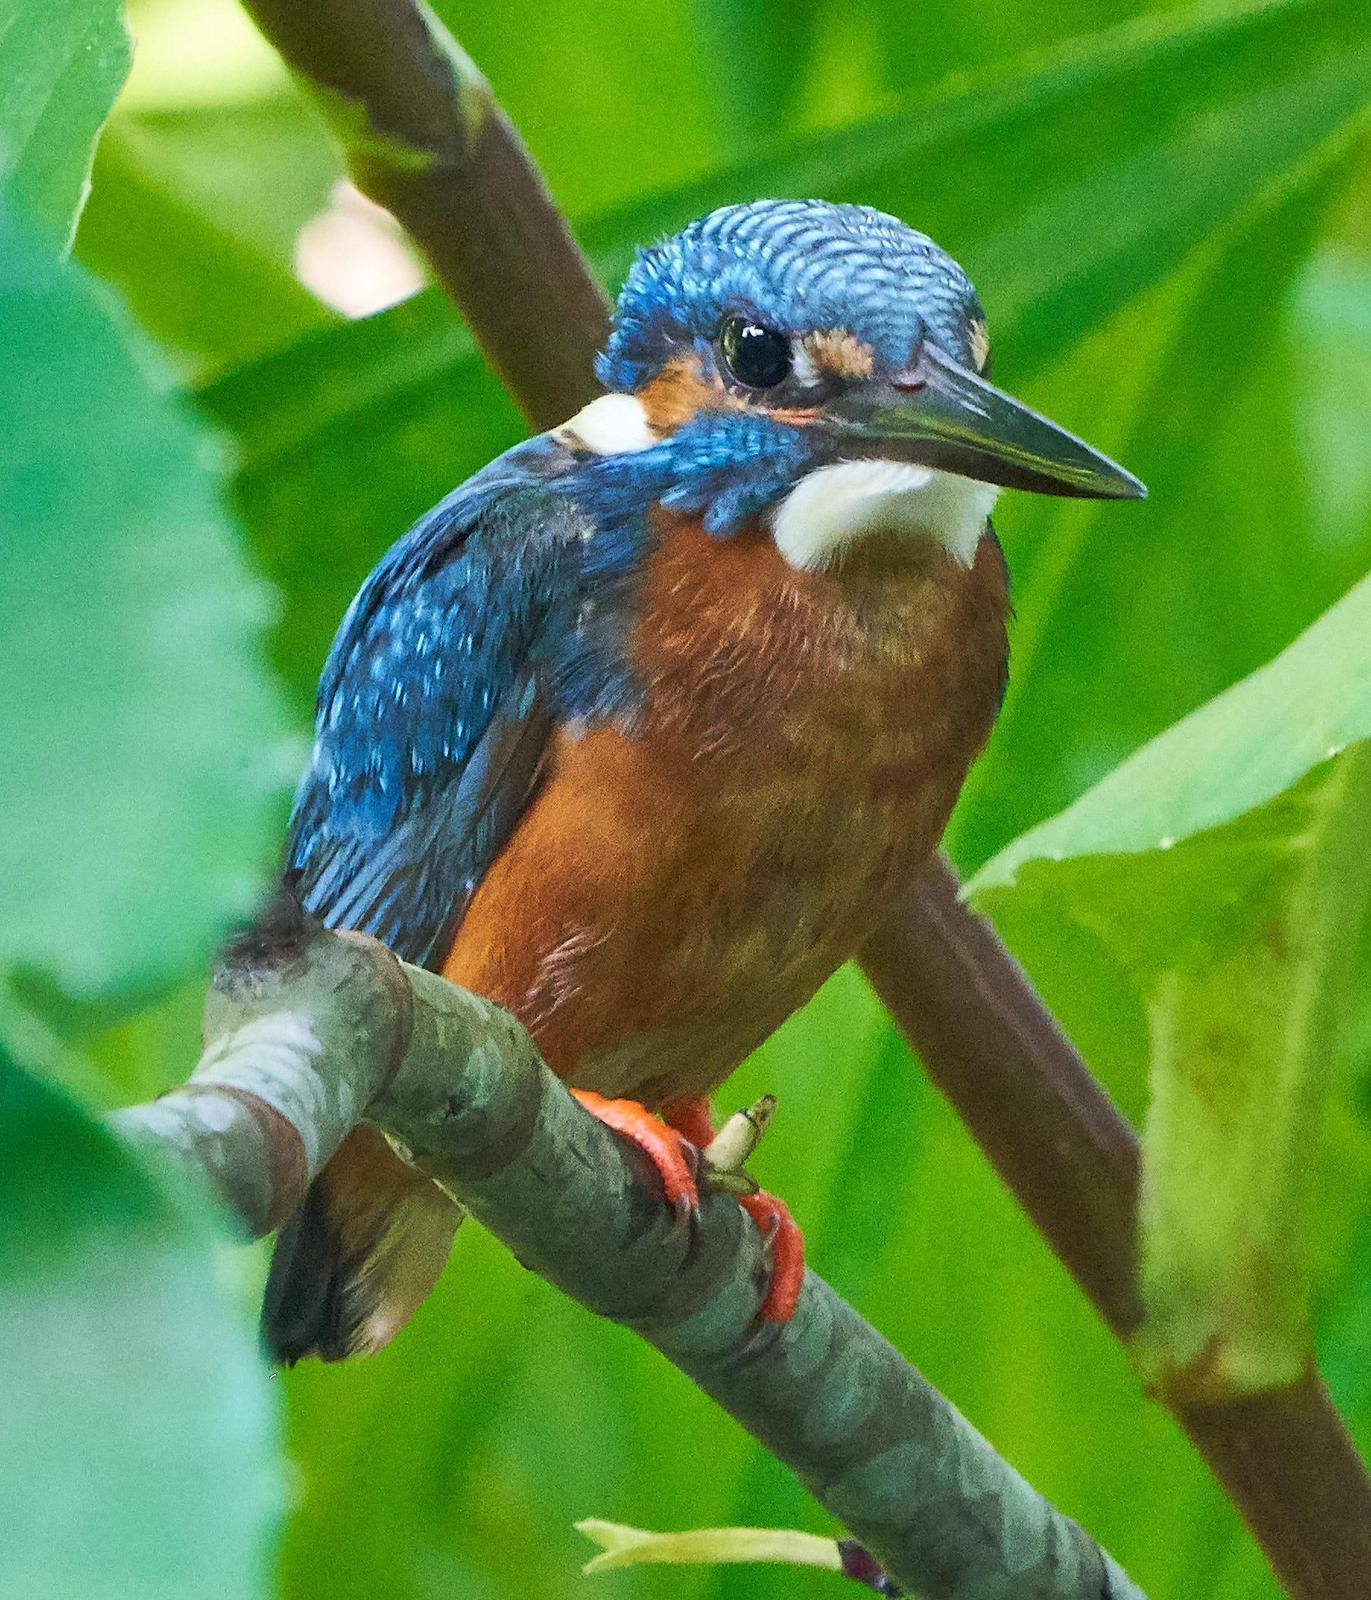 Common Kingfisher Photo by Steven Cheong